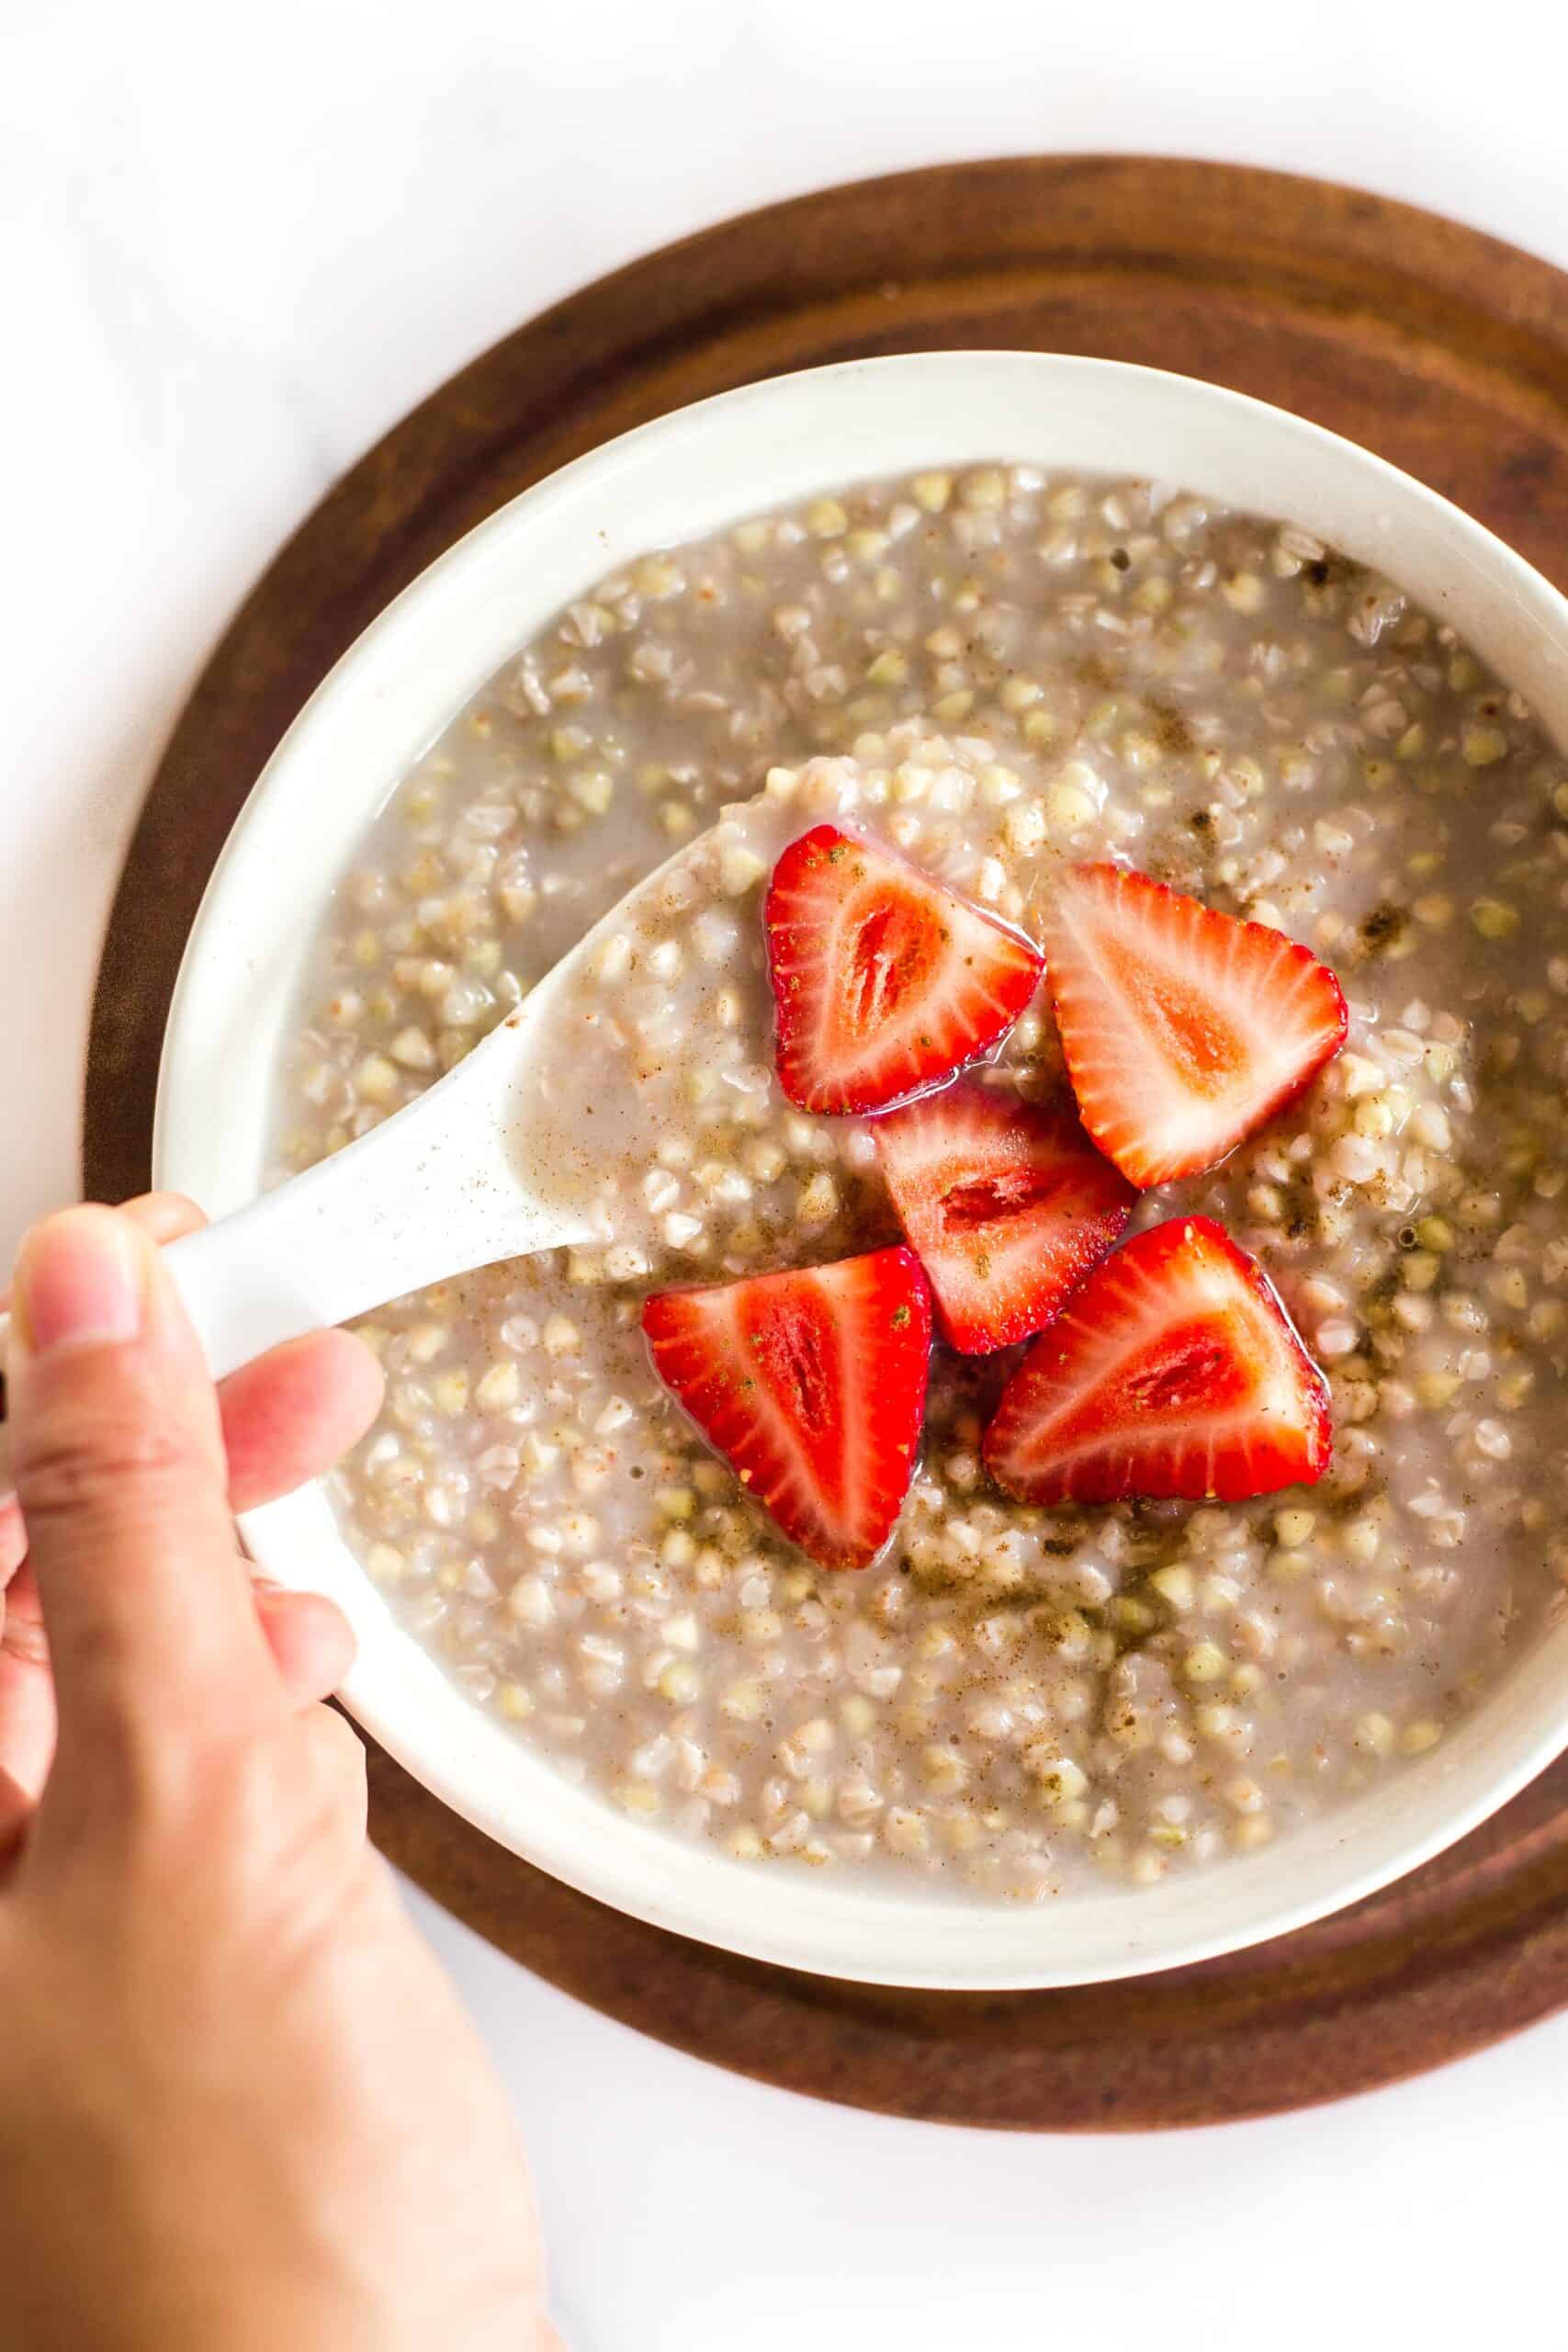 Hand holding a spoon in a bowl of buckwheat porridge with sliced strawberries.